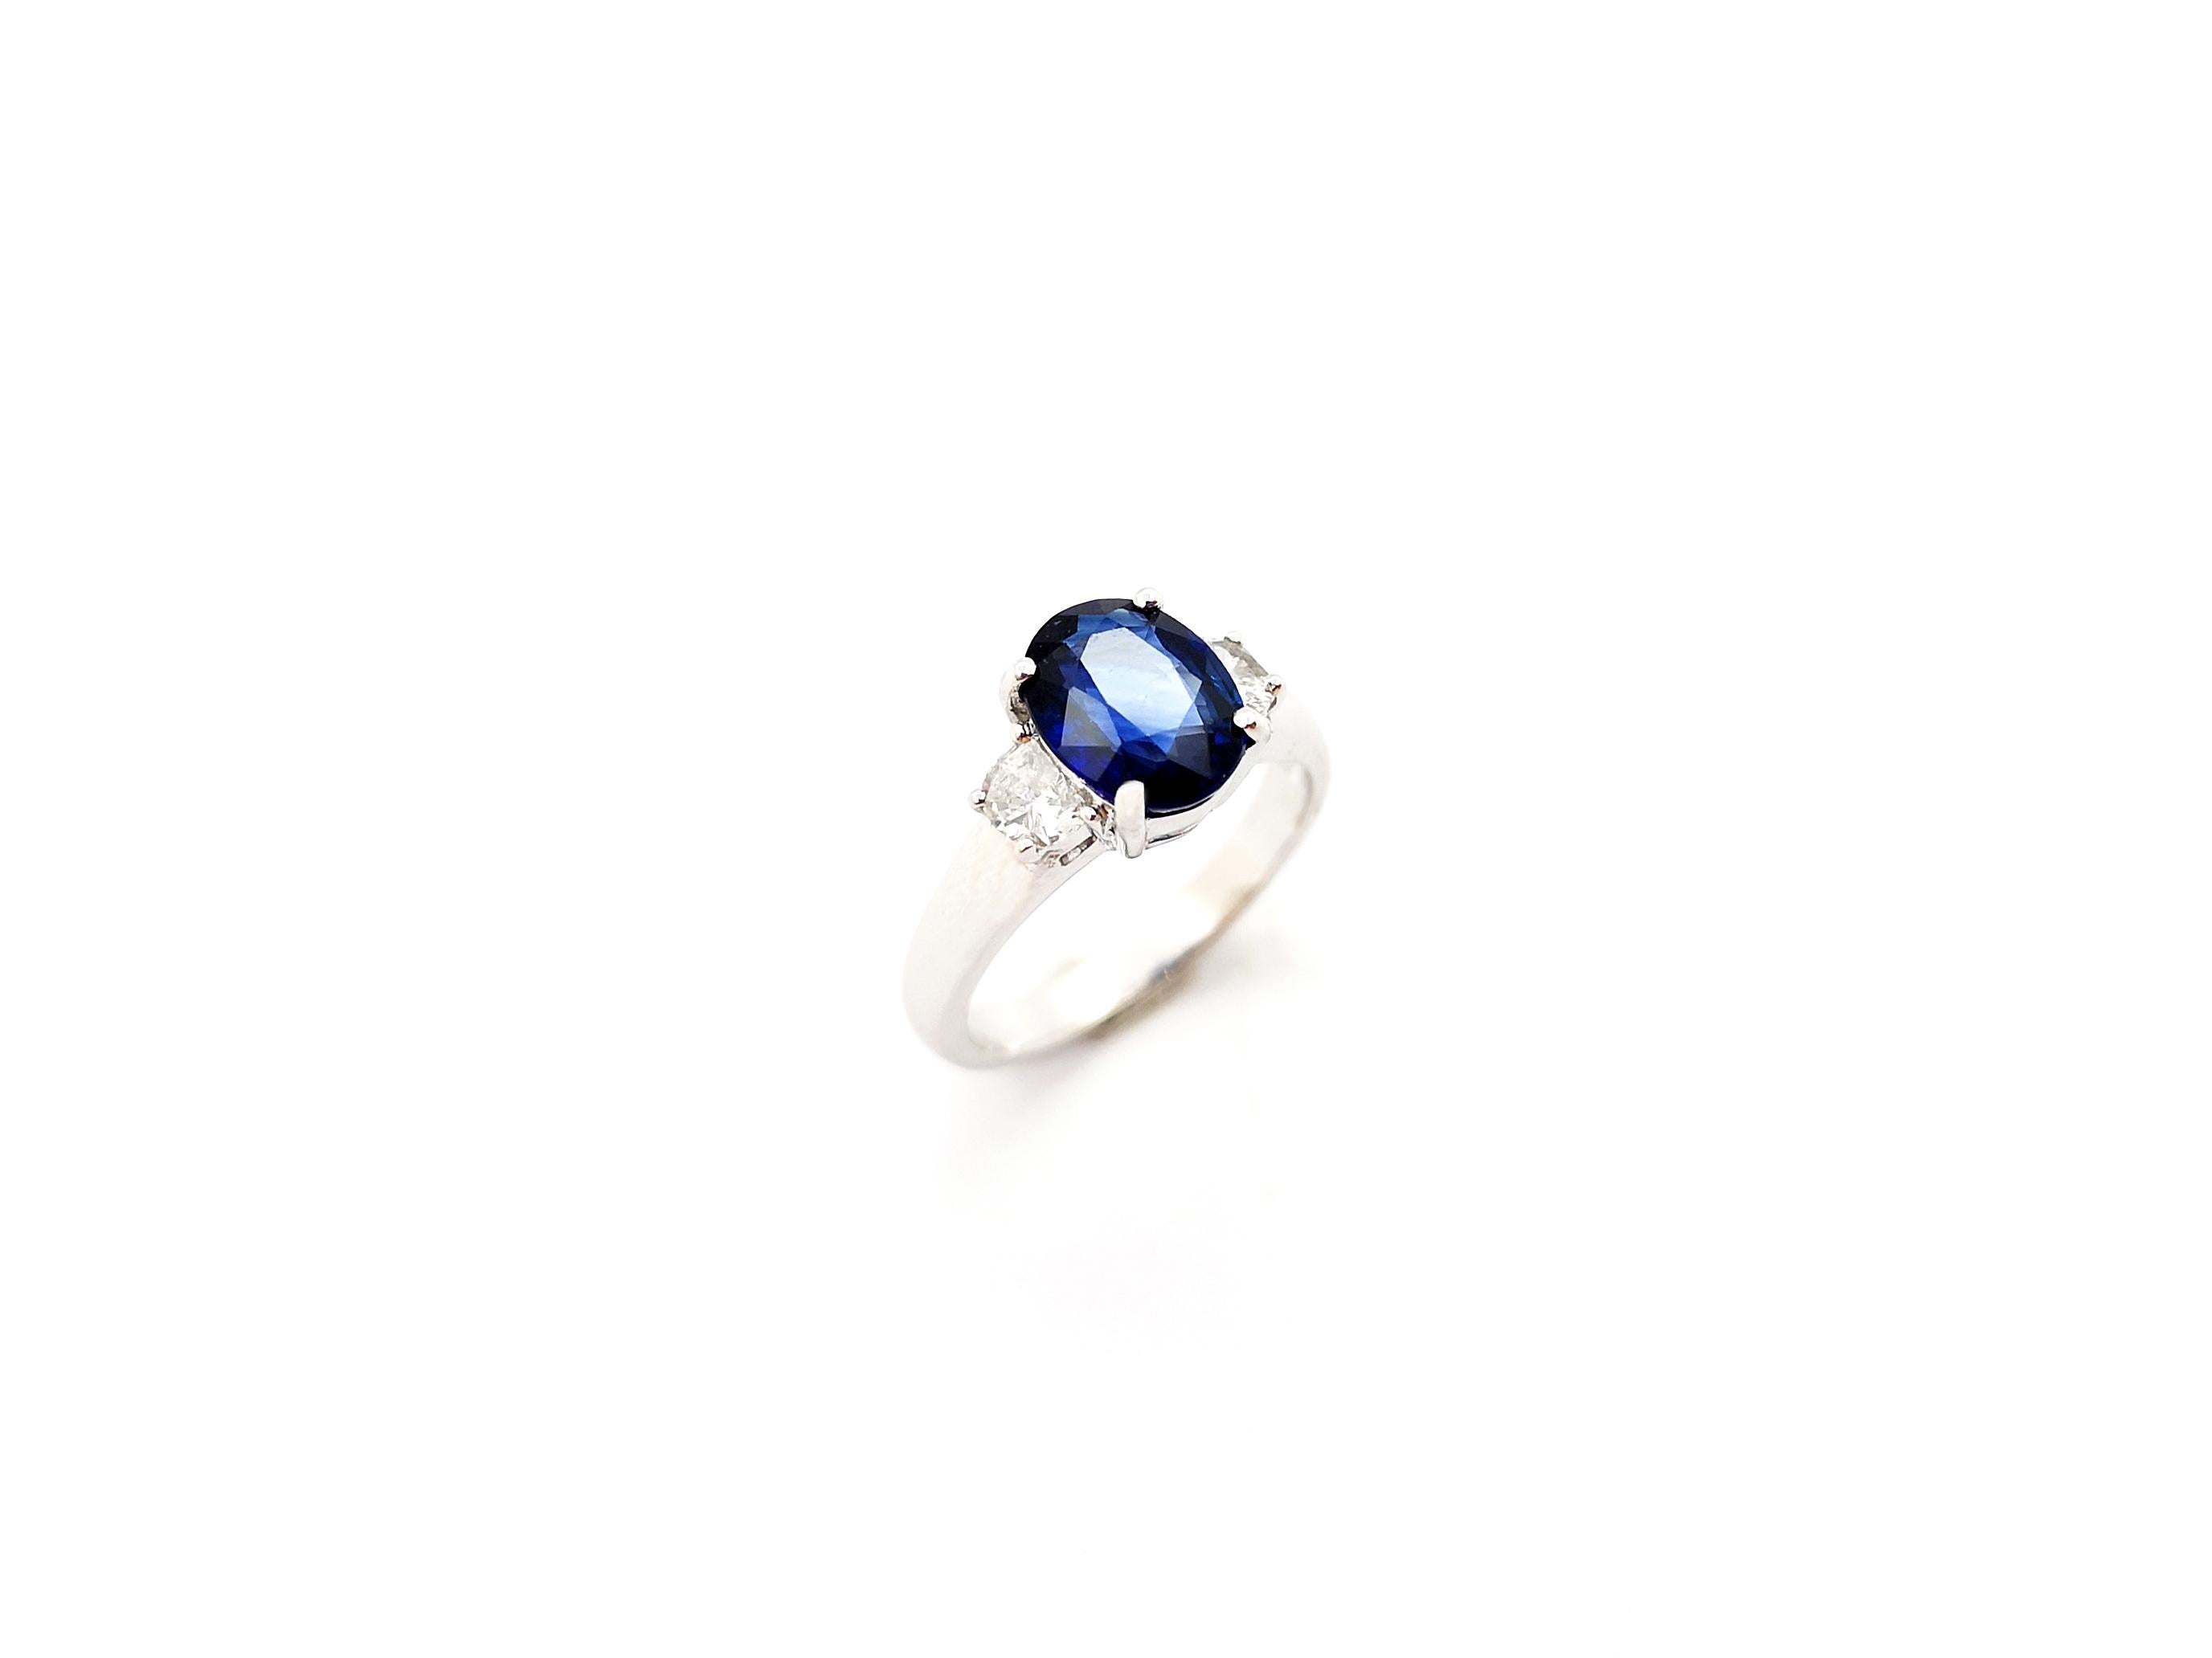 GIA Certified Blue Sapphire with Diamond Ring set in Platinum 950 Settings For Sale 10